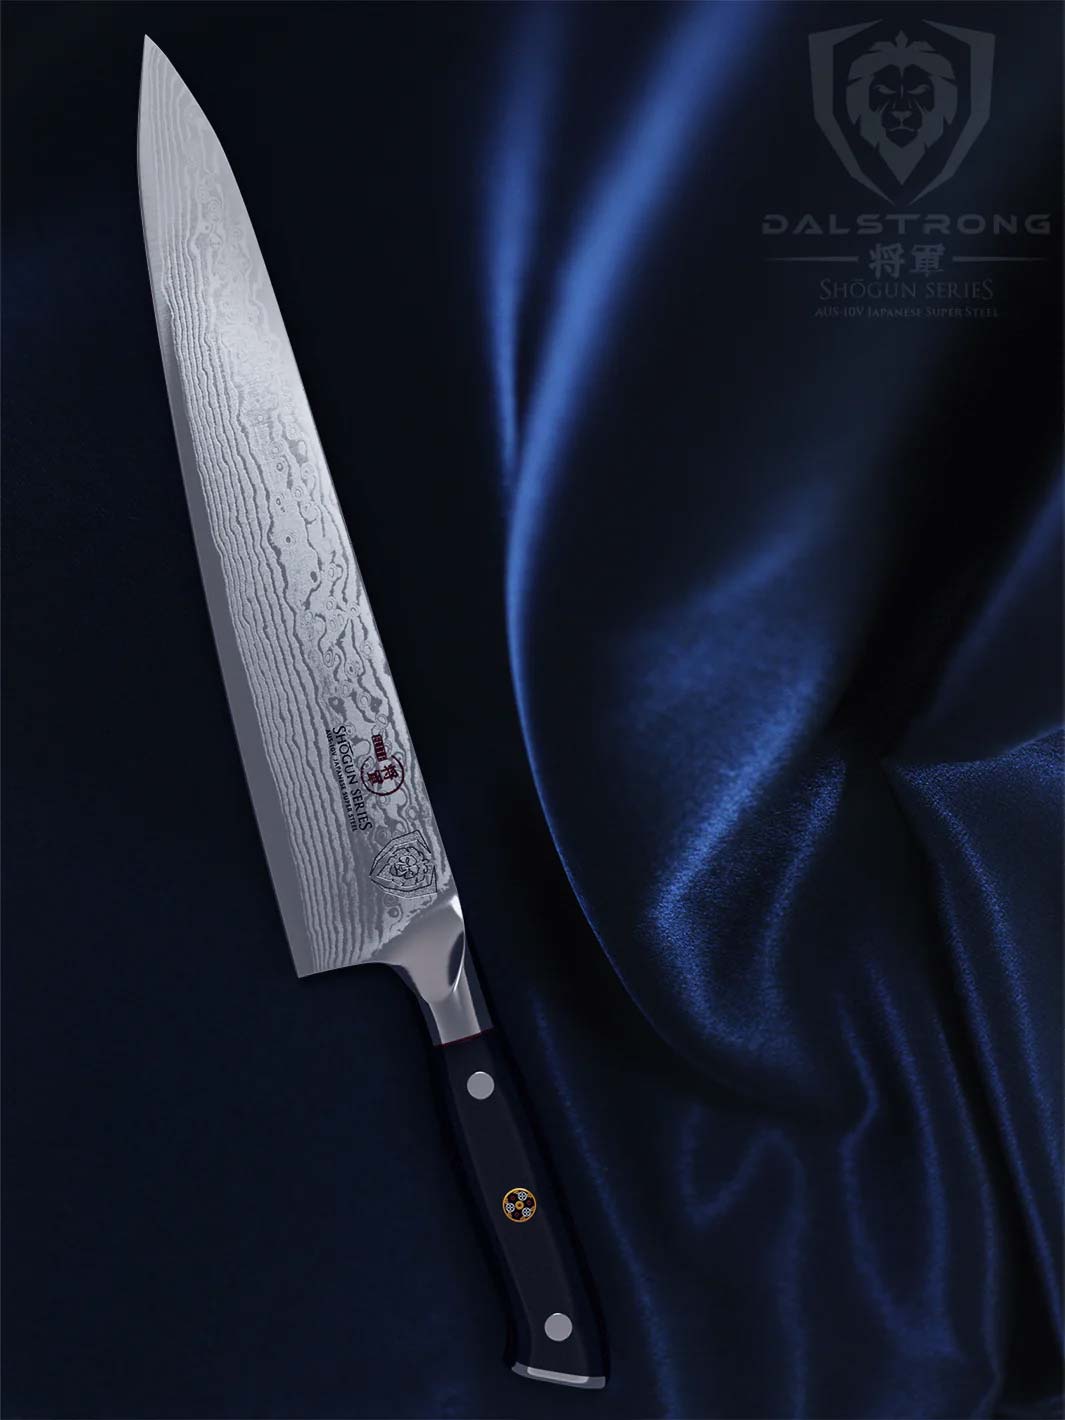 Dalstrong shogun series 9.5 inch chef knife with black handles on a cloth.